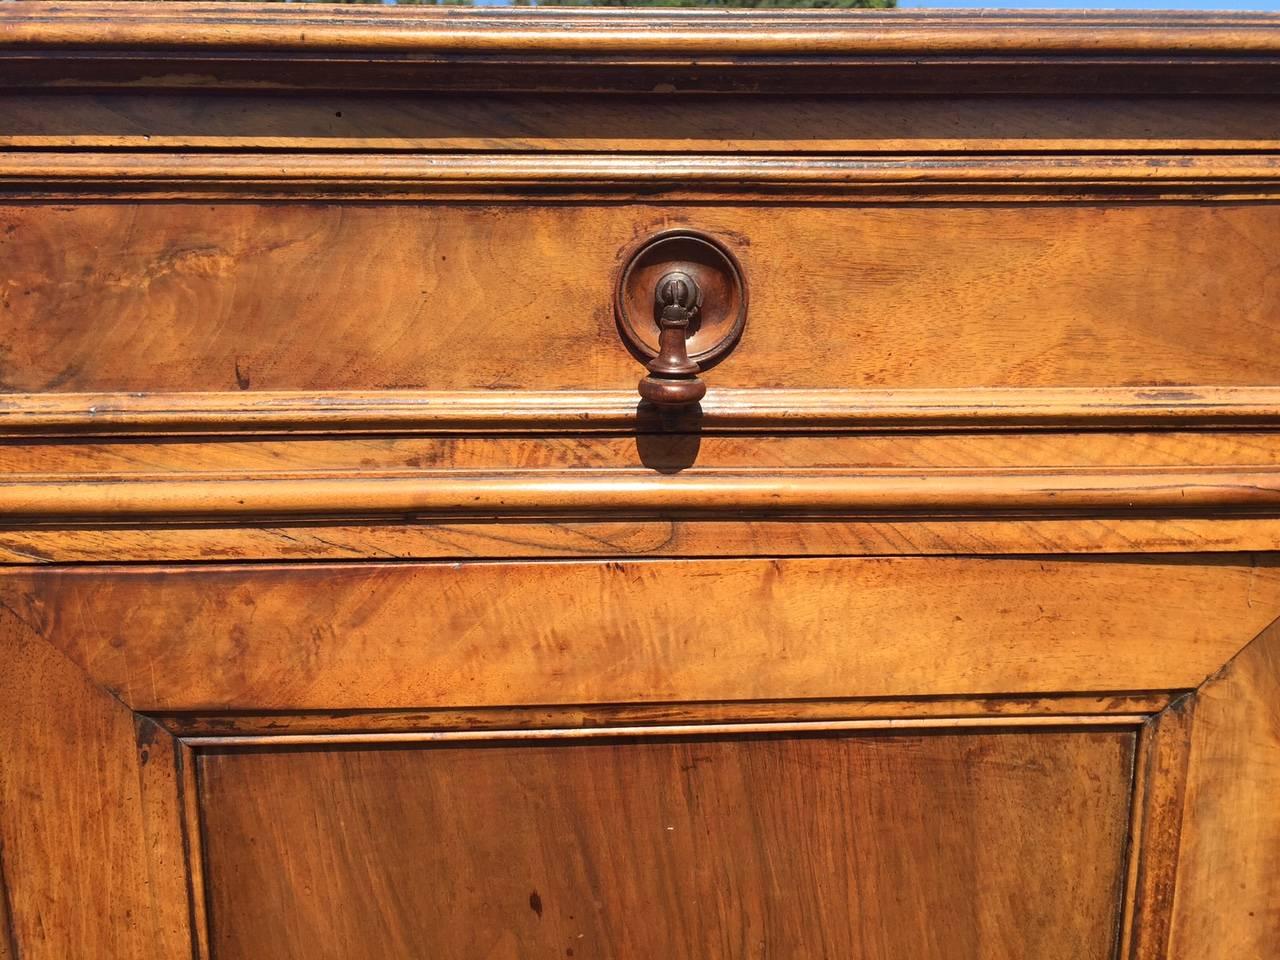 Early 19th century Italian solid walnut buffet bought in Arezzo, Italy, having beautiful hand carved drawers on top of panel doors with storage inside.
It is French Restoration style from about 1840.